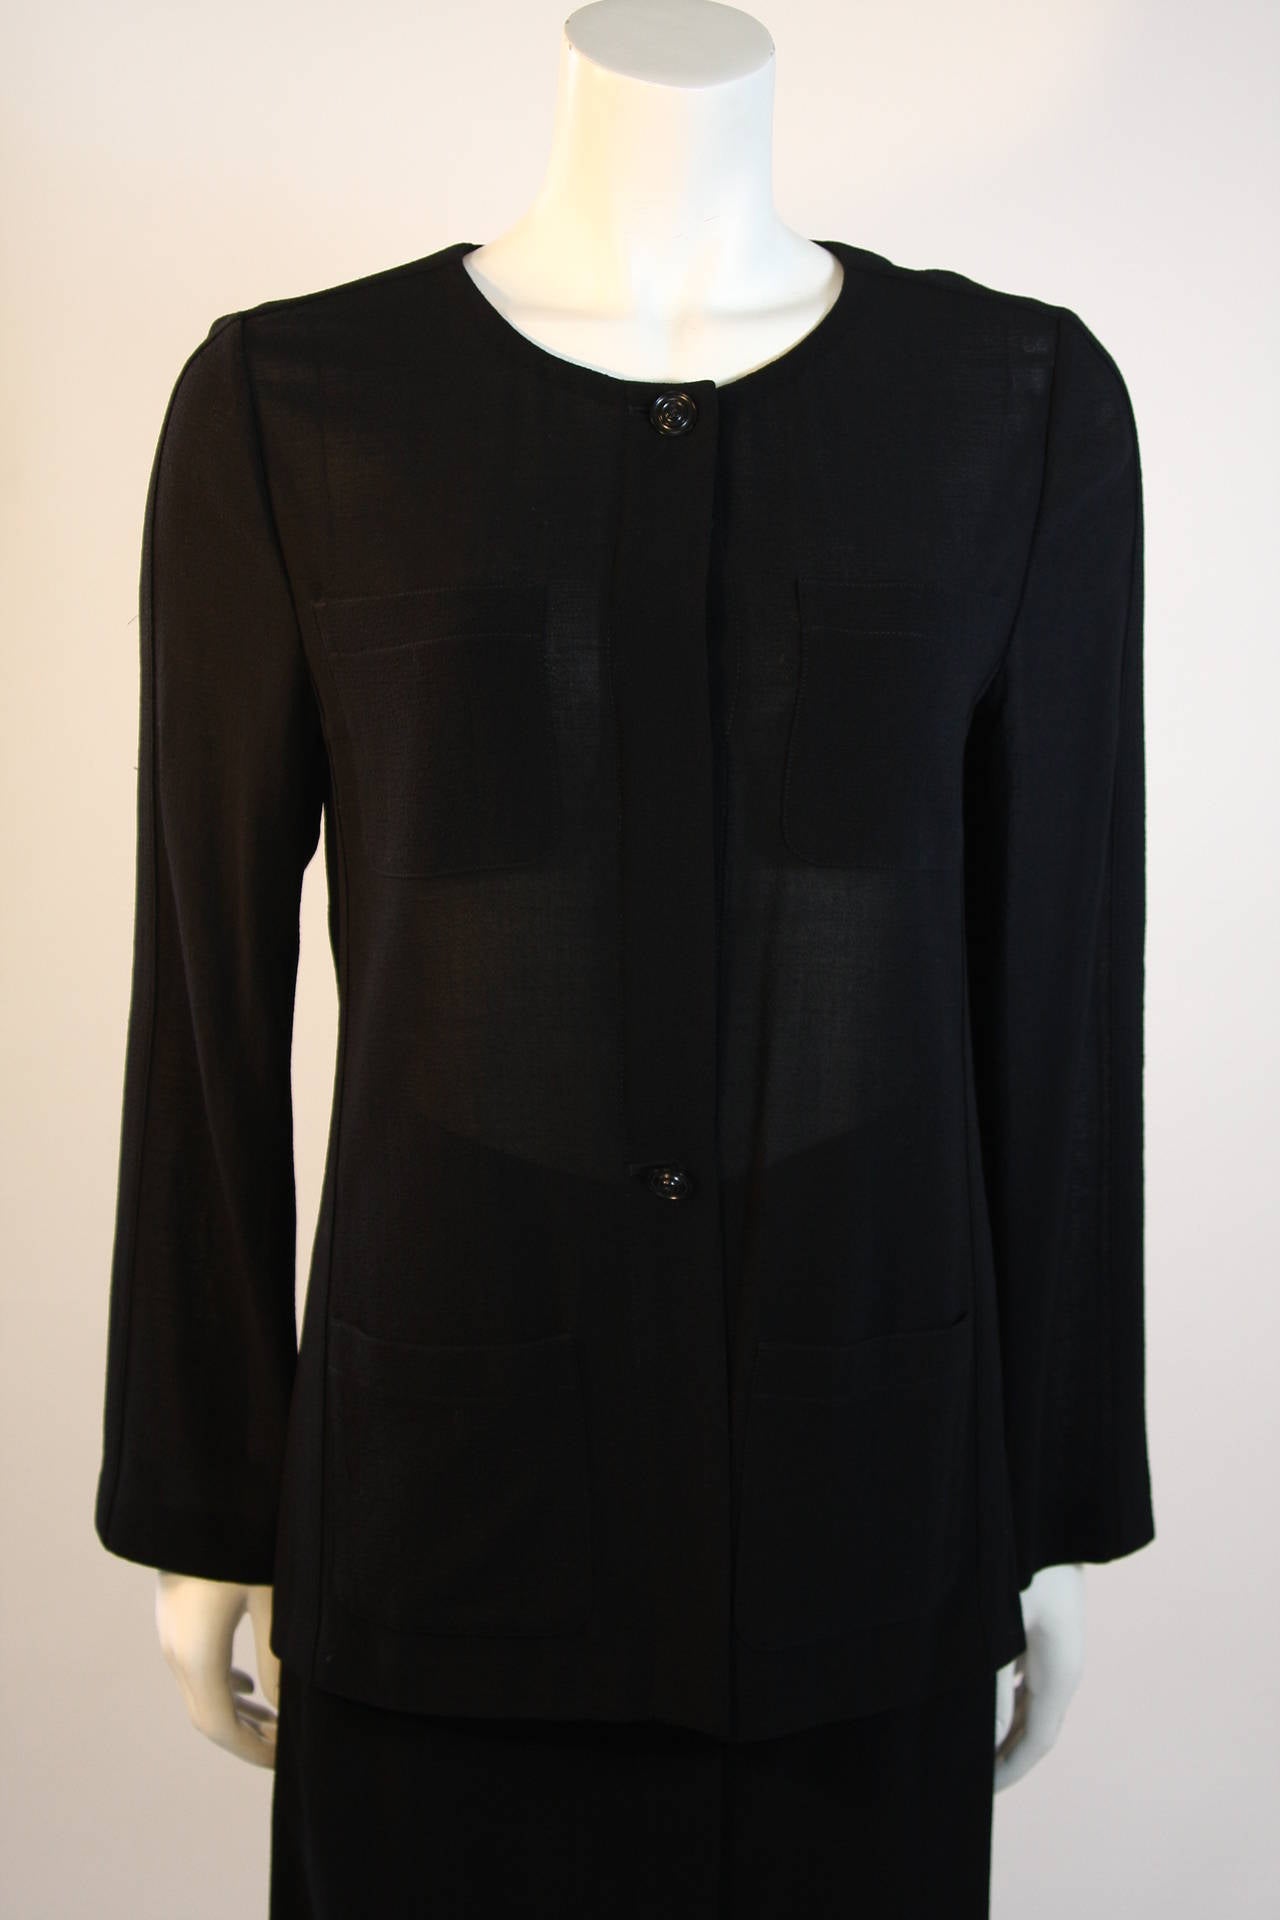 1999 Chanel Sheer Black wool 4 pocket Jacket & wool silk lined Skirt sz 40 In New Condition For Sale In Los Angeles, CA